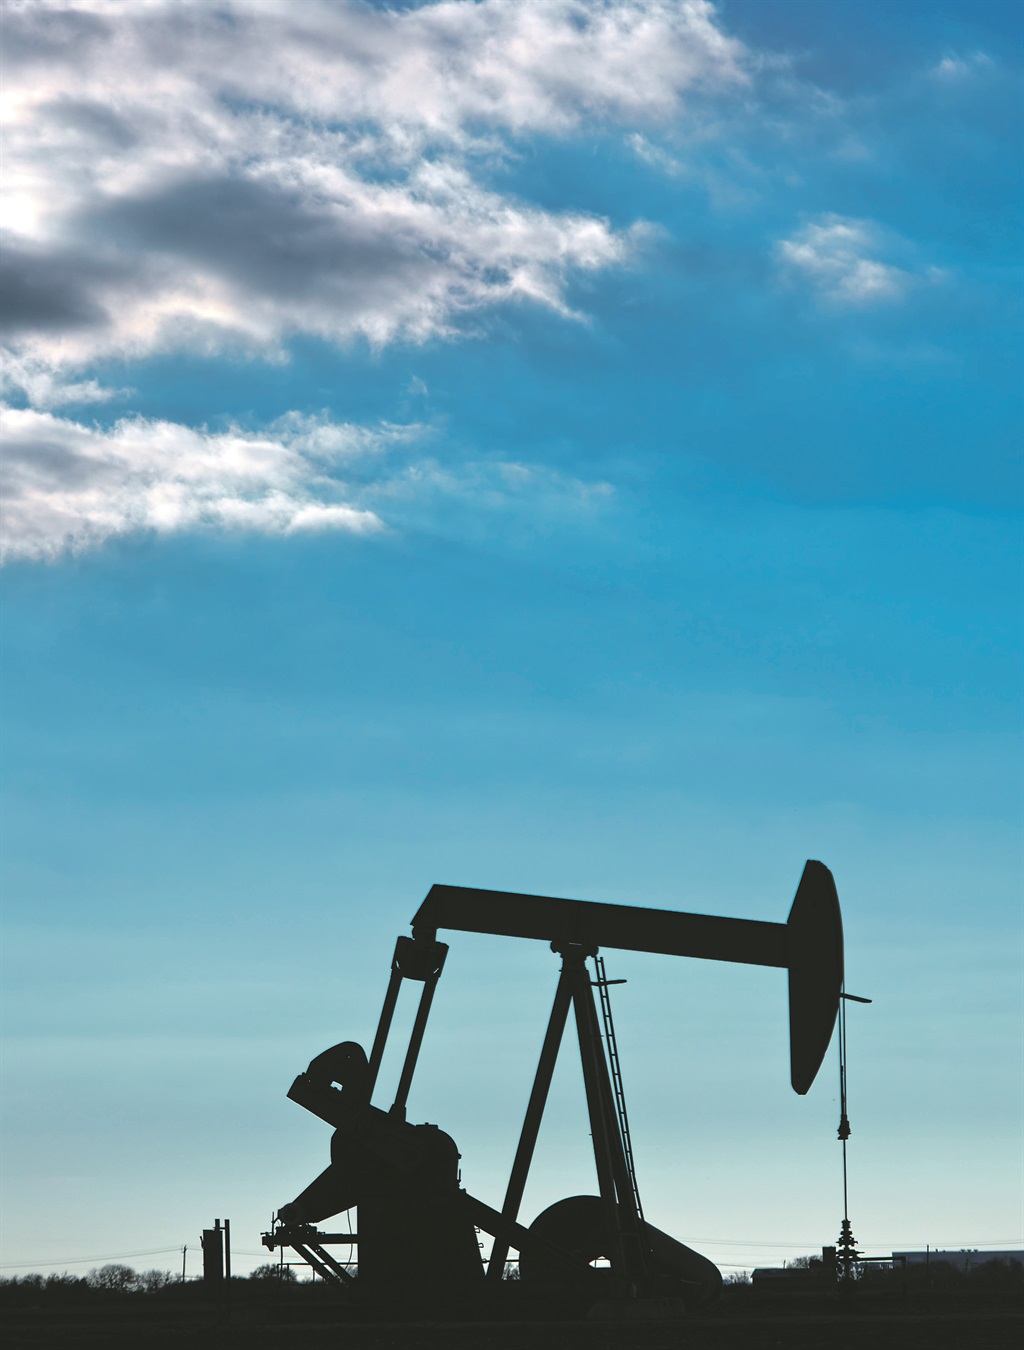 A pump jack operates in an oilfield near Corpus Christi, Texas, in the US. Crude oil prices slid to their lowest levels since December 2003 this week as turbulence in China, the world’s biggest energy consumer, prompted renewed concerns about the strength of demand. Picture: Eddie Seal/Bloomberg